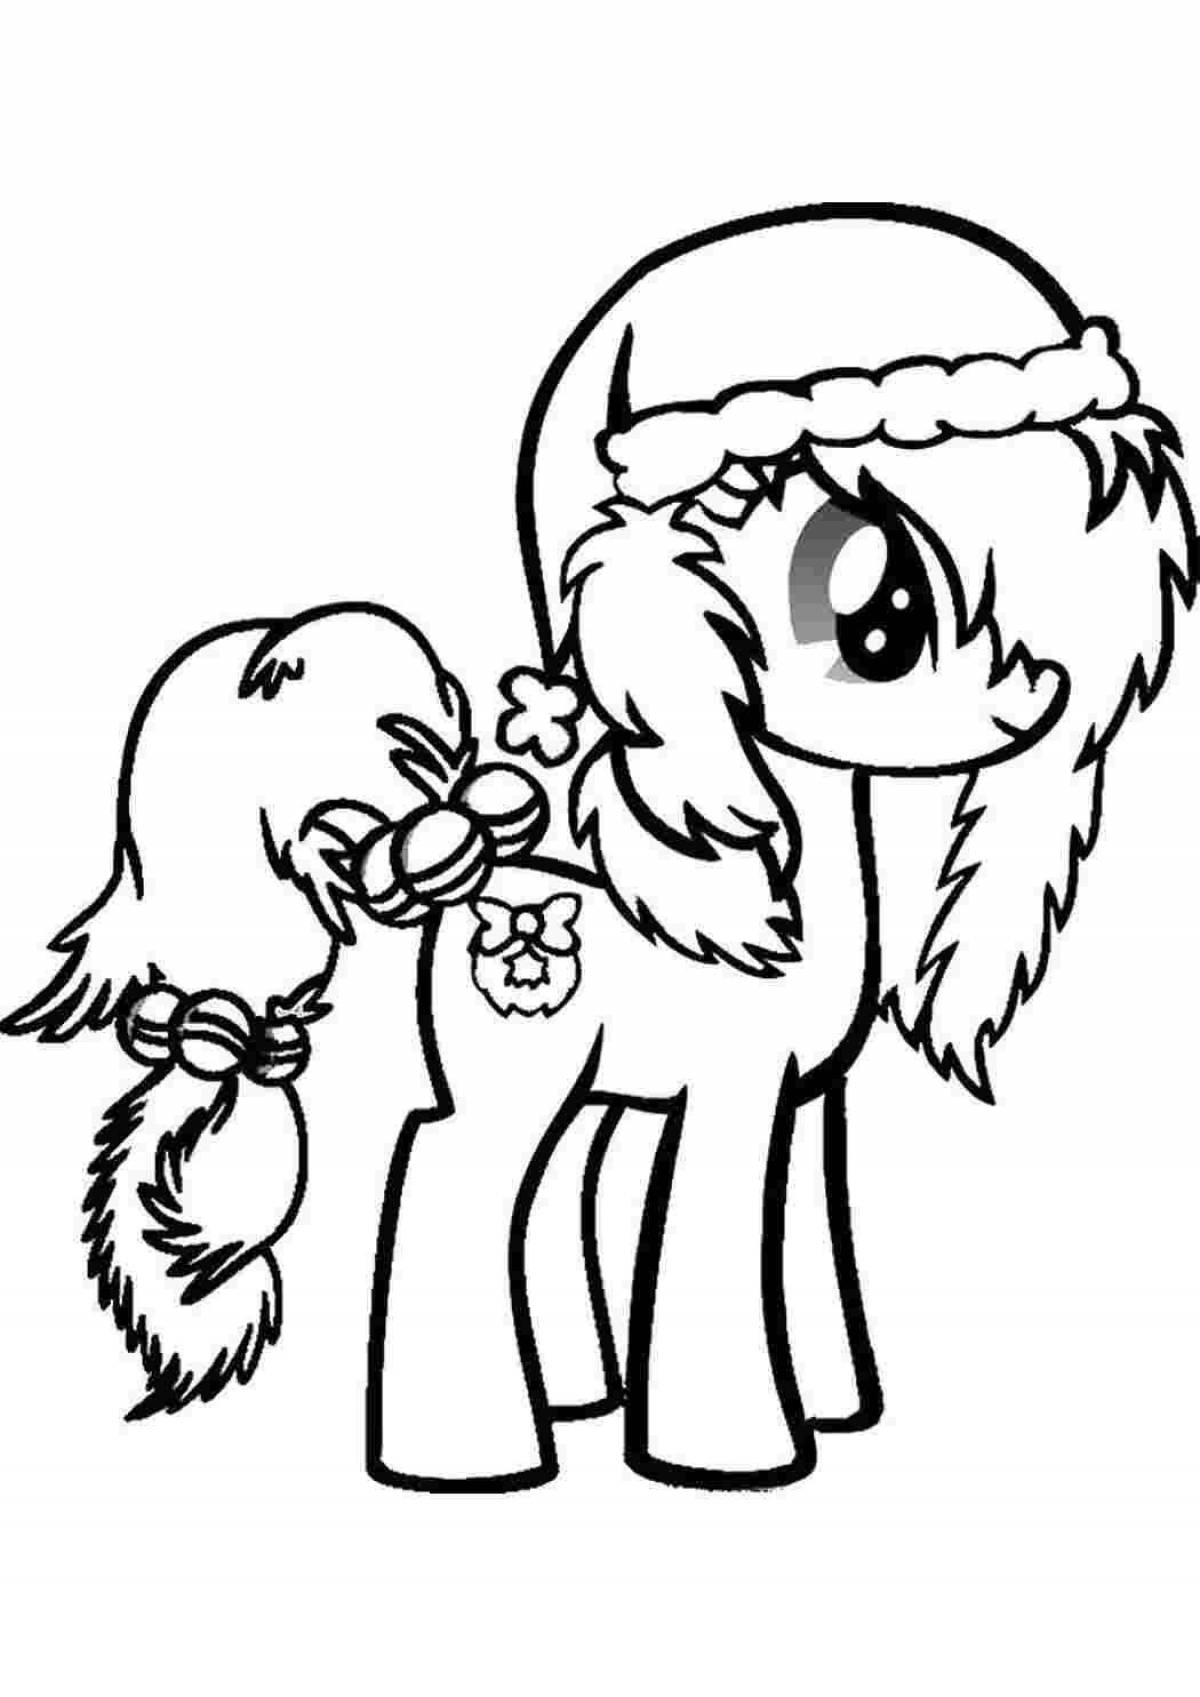 Vibrant pony coloring page